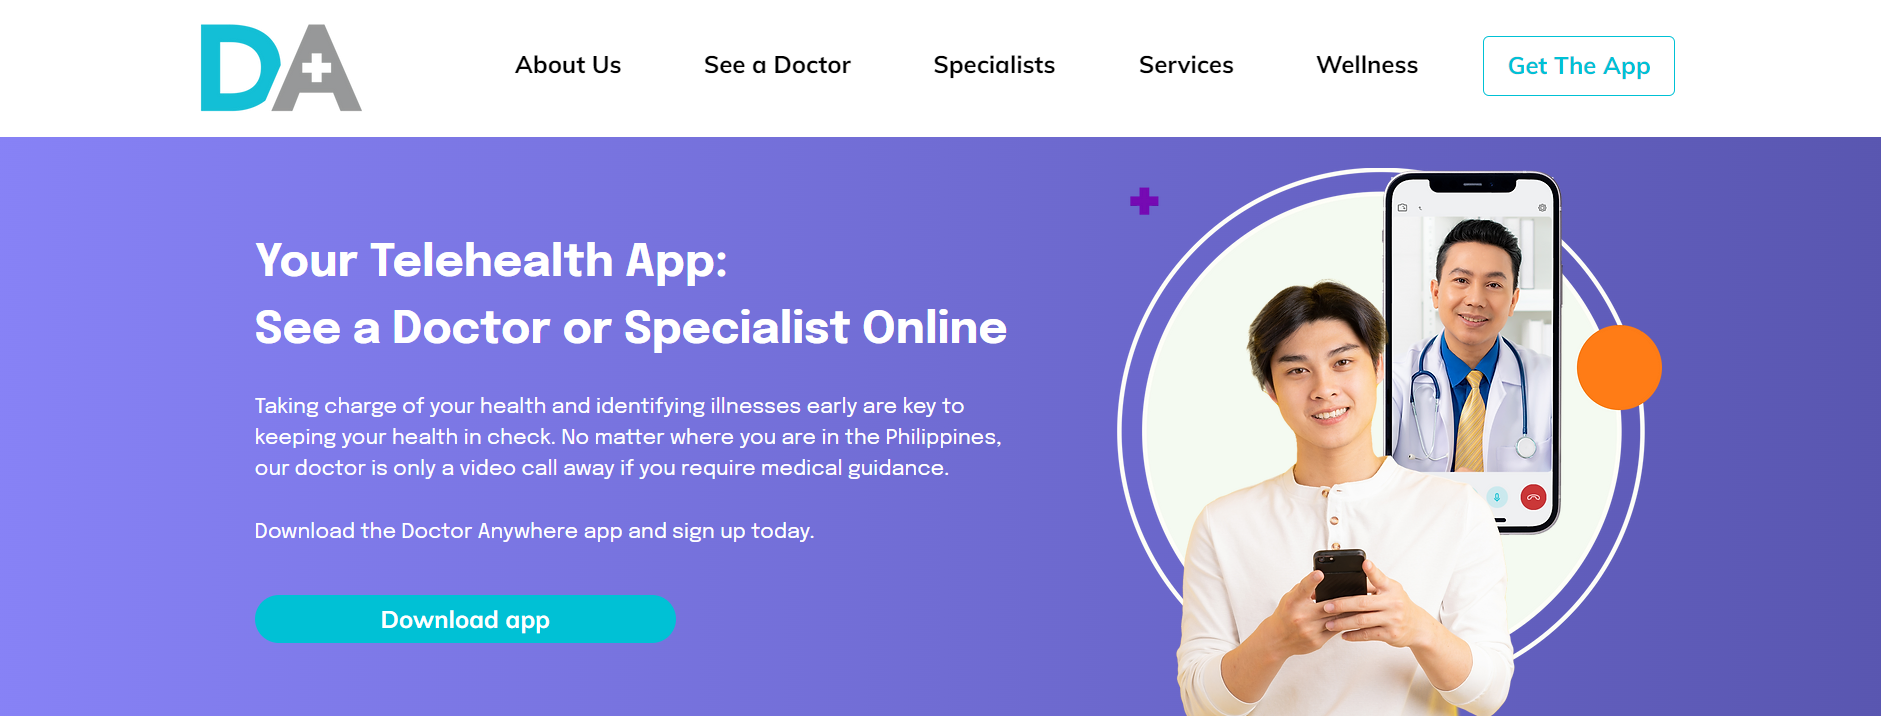 Doctor Anywhere Philippines